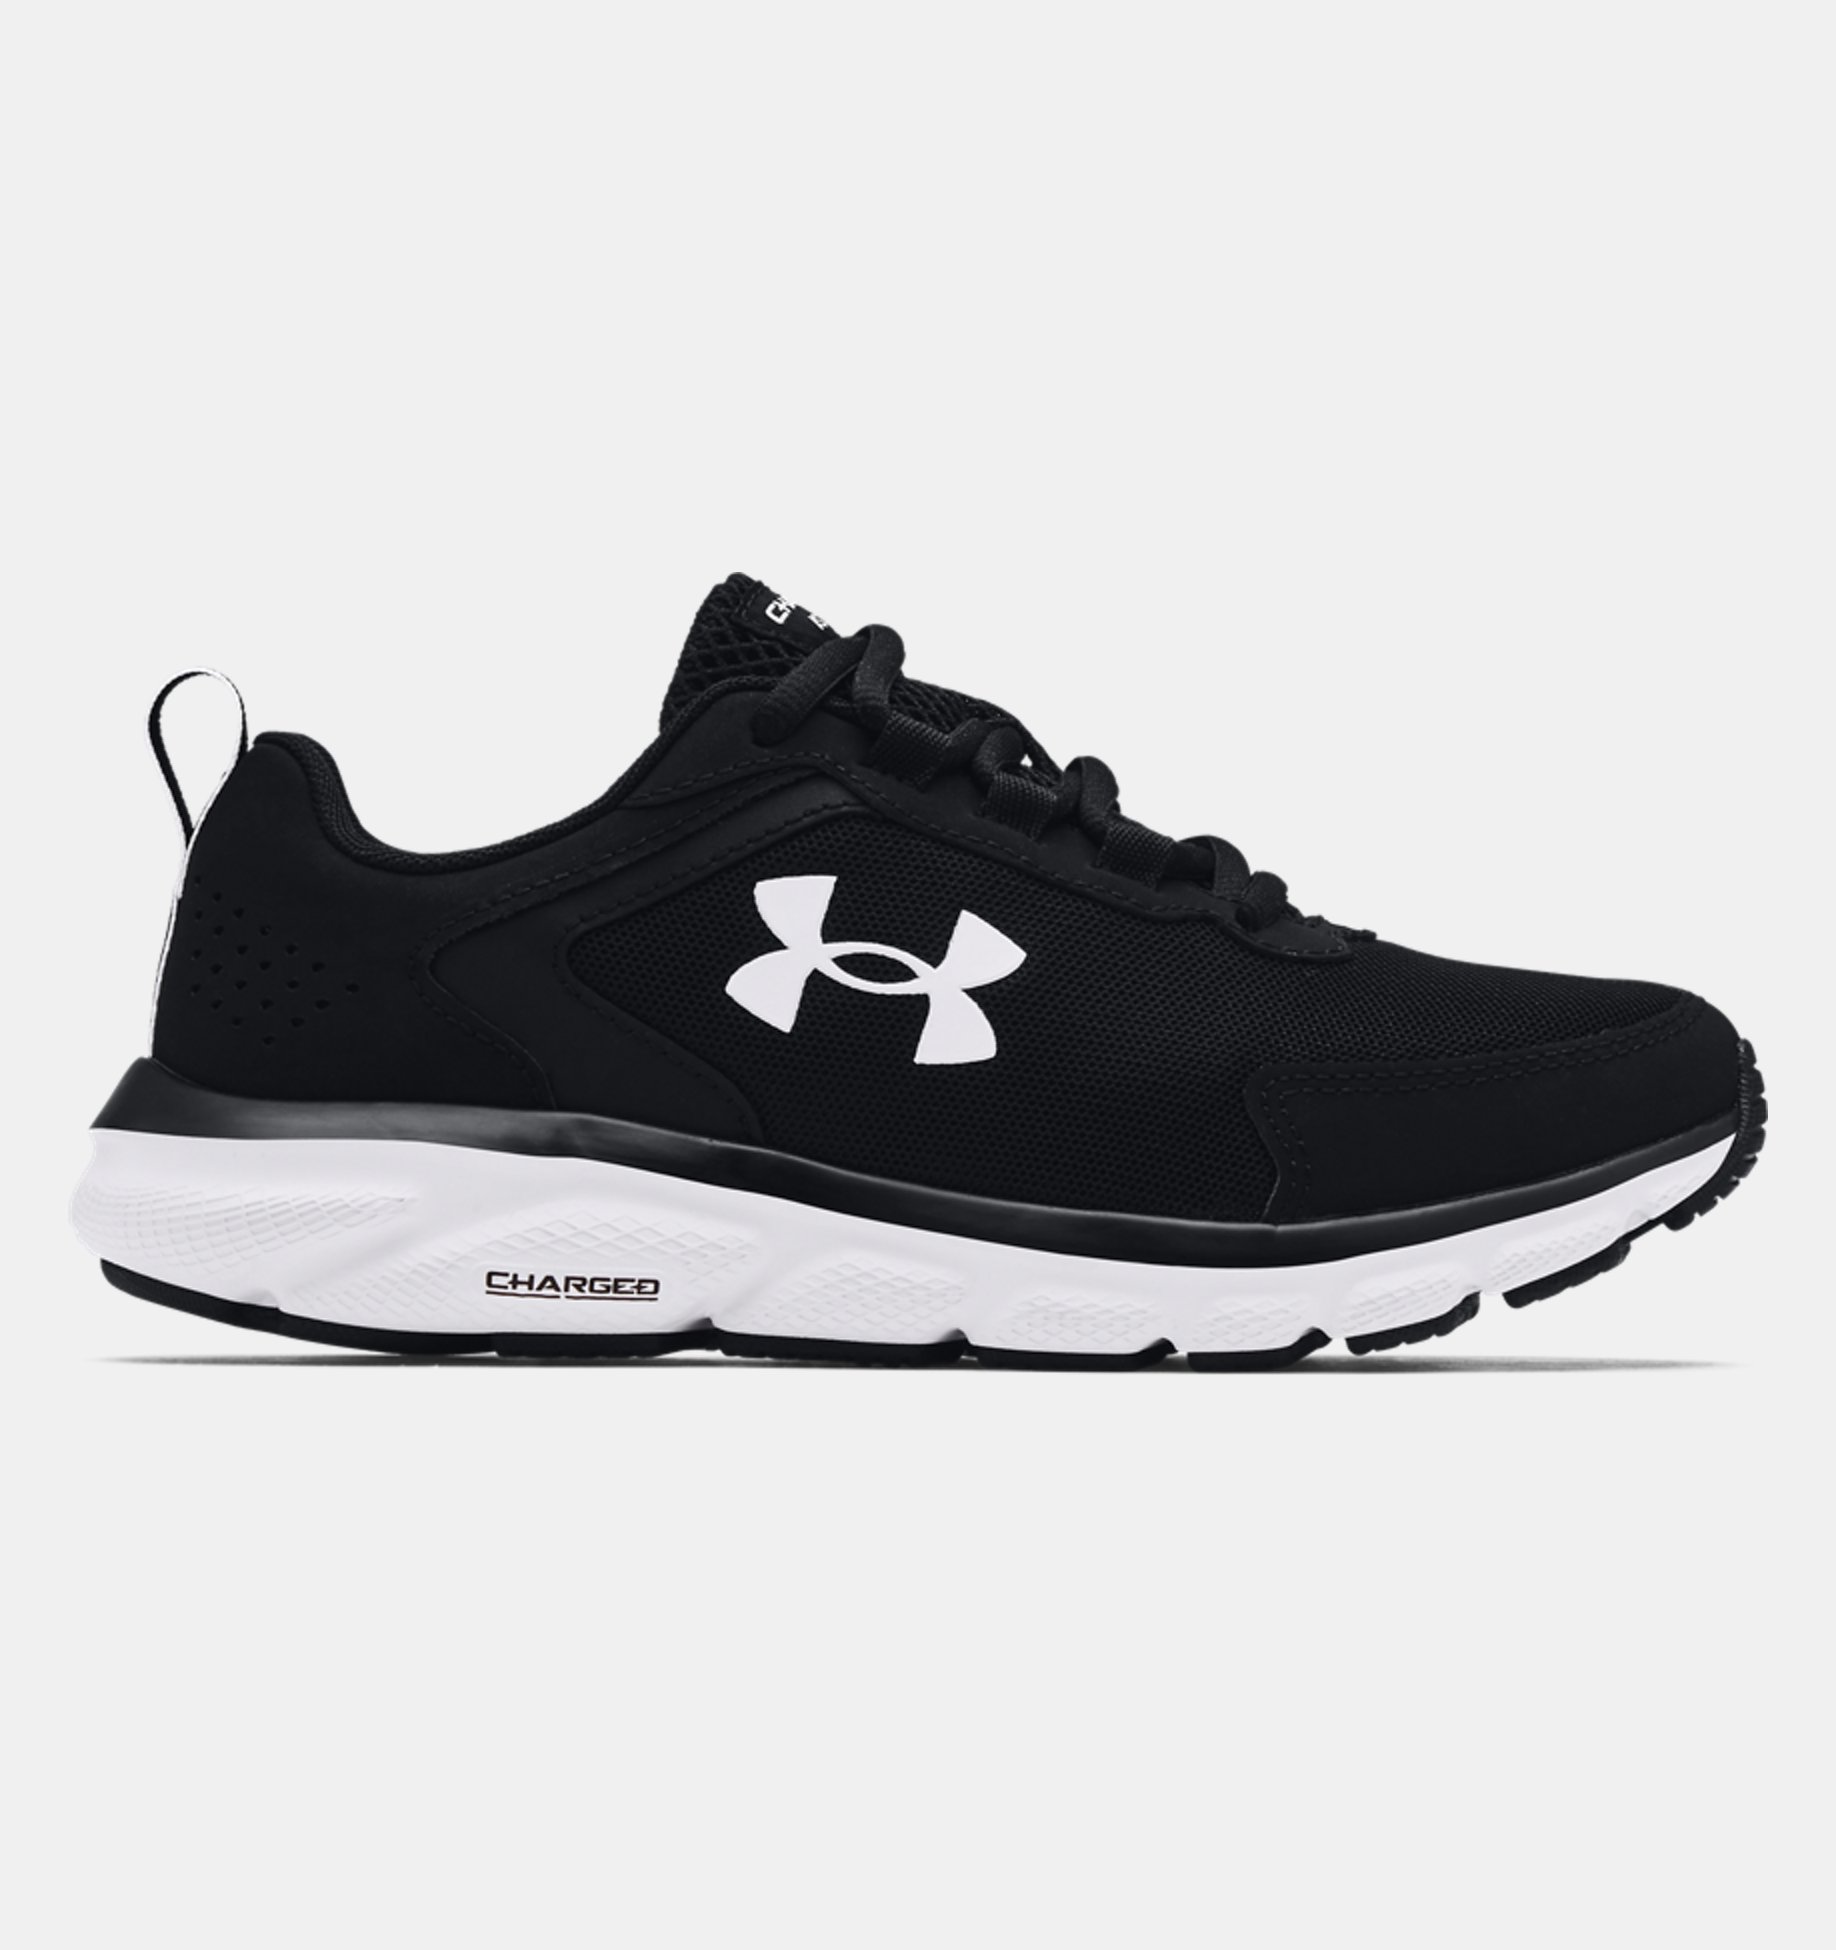 Does Under Armour Make Womens Shoes in Wide Width?